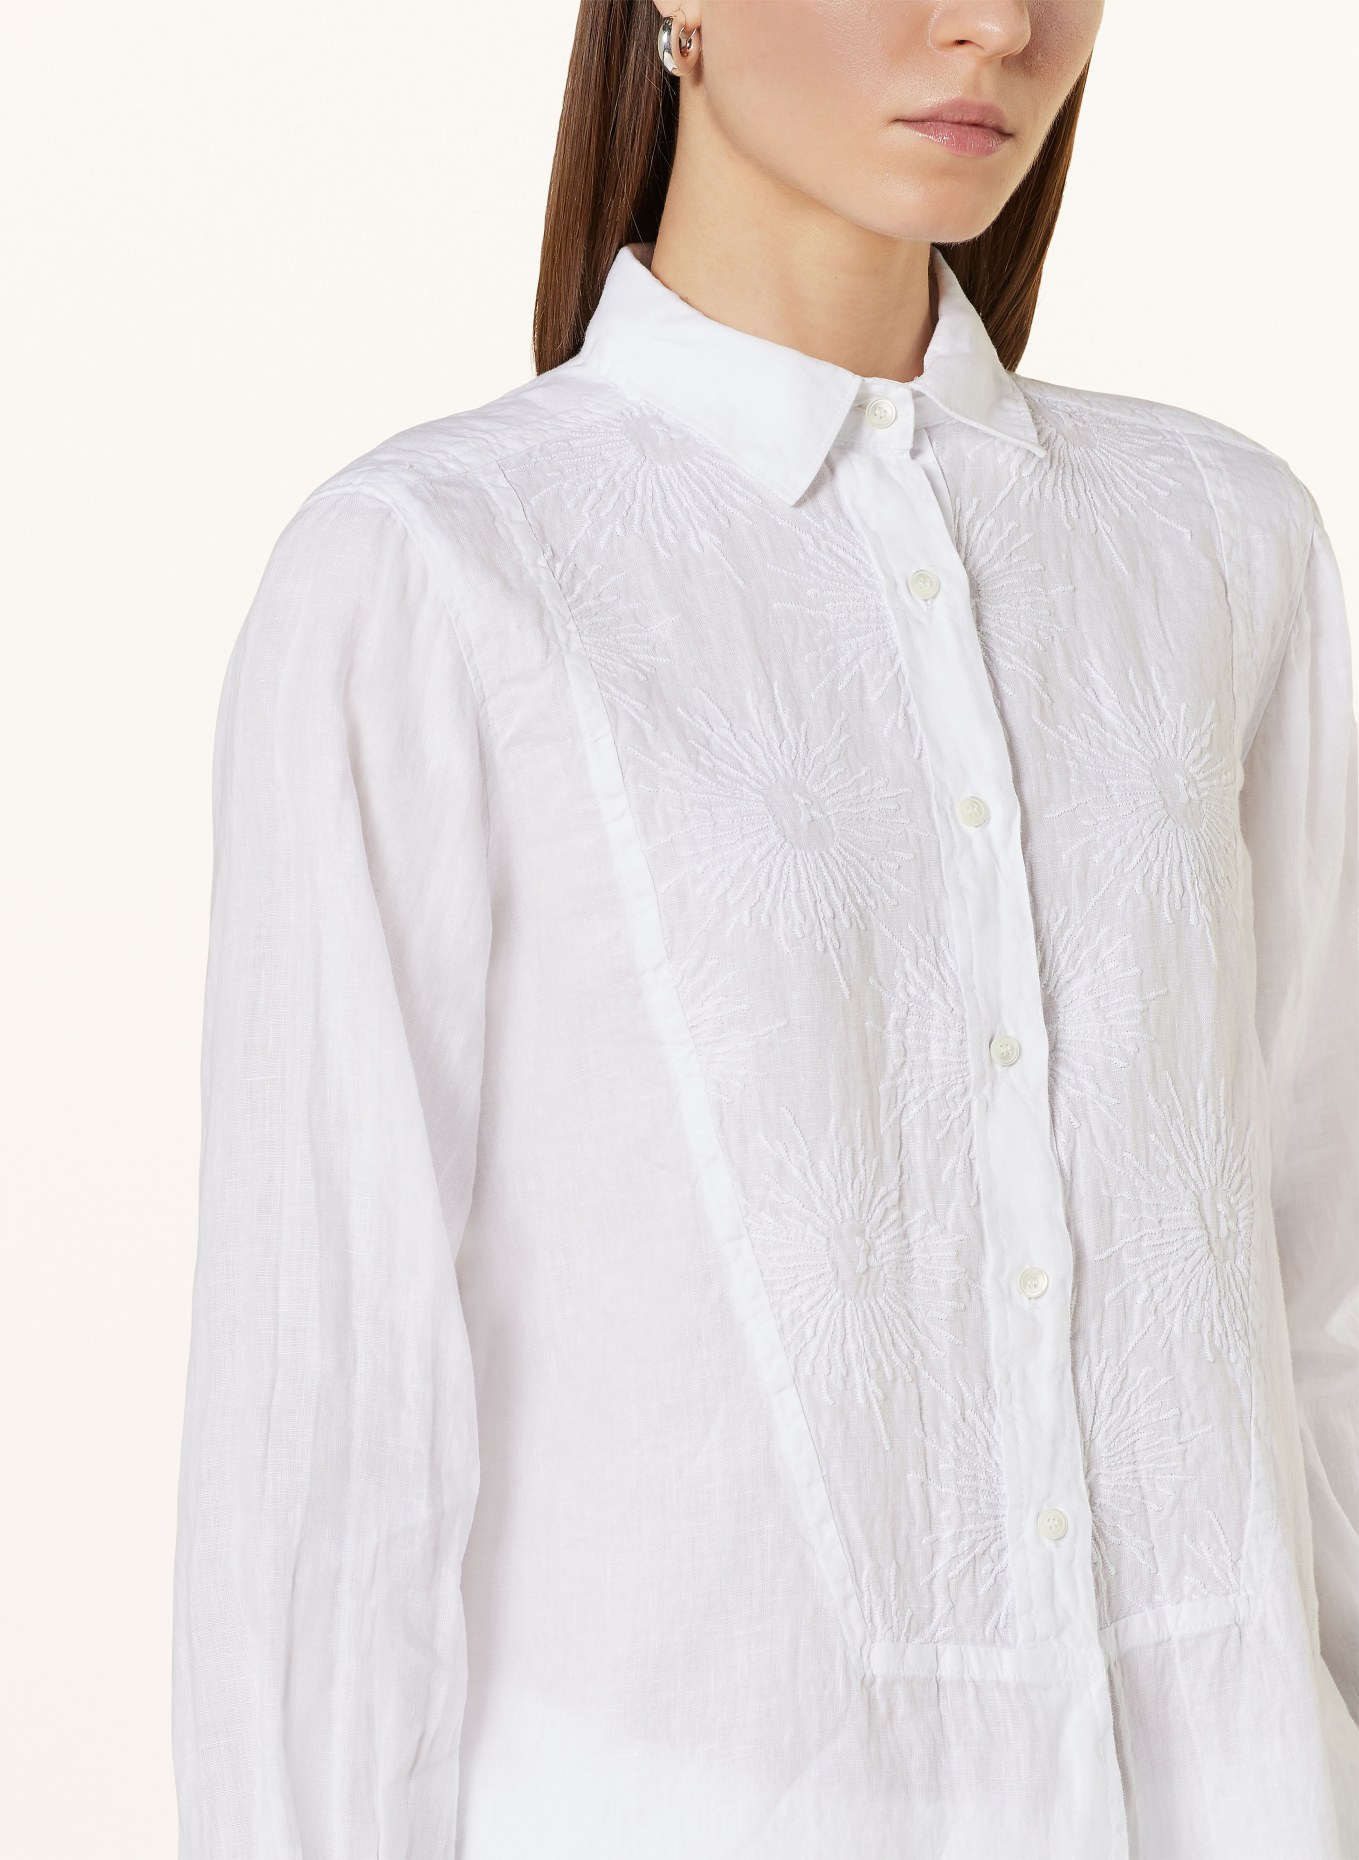 ROSSO35 Shirt blouse made of linen, Color: WHITE (Image 4)